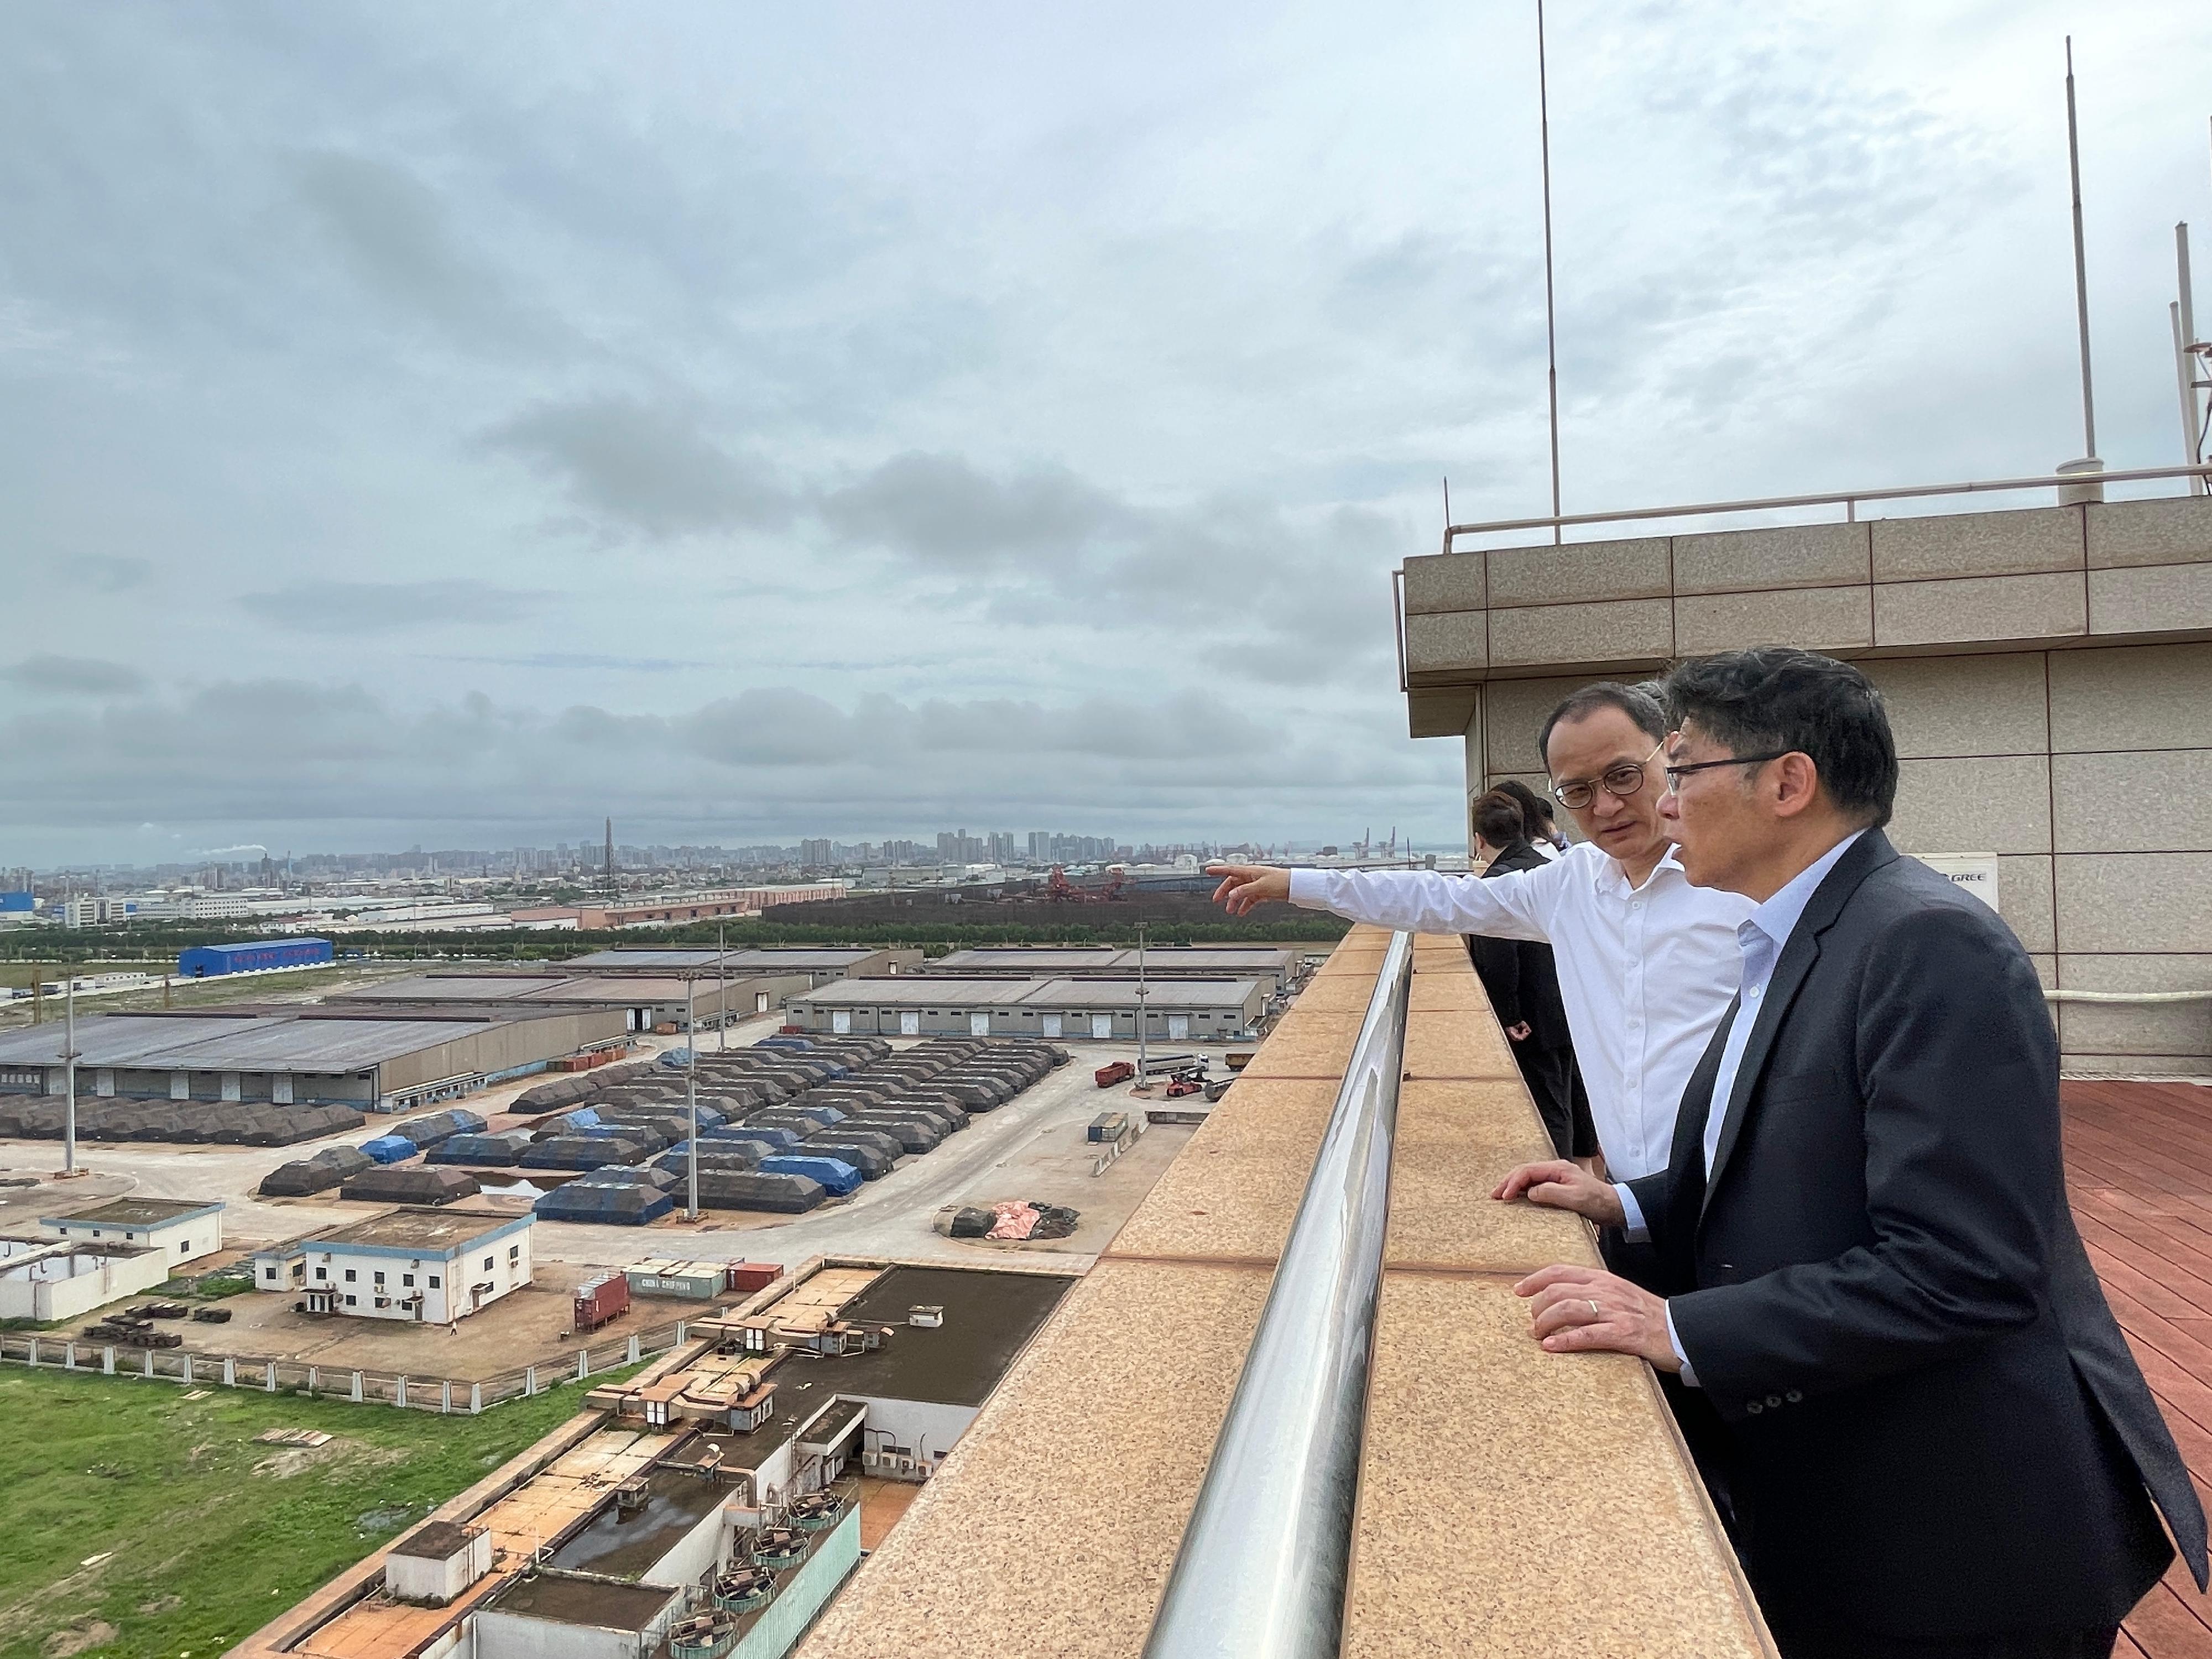 The Secretary for Transport and Logistics, Mr Lam Sai-hung (right), is briefed on the development of Zhanjiang's industries during his visit to the city today (June 5).